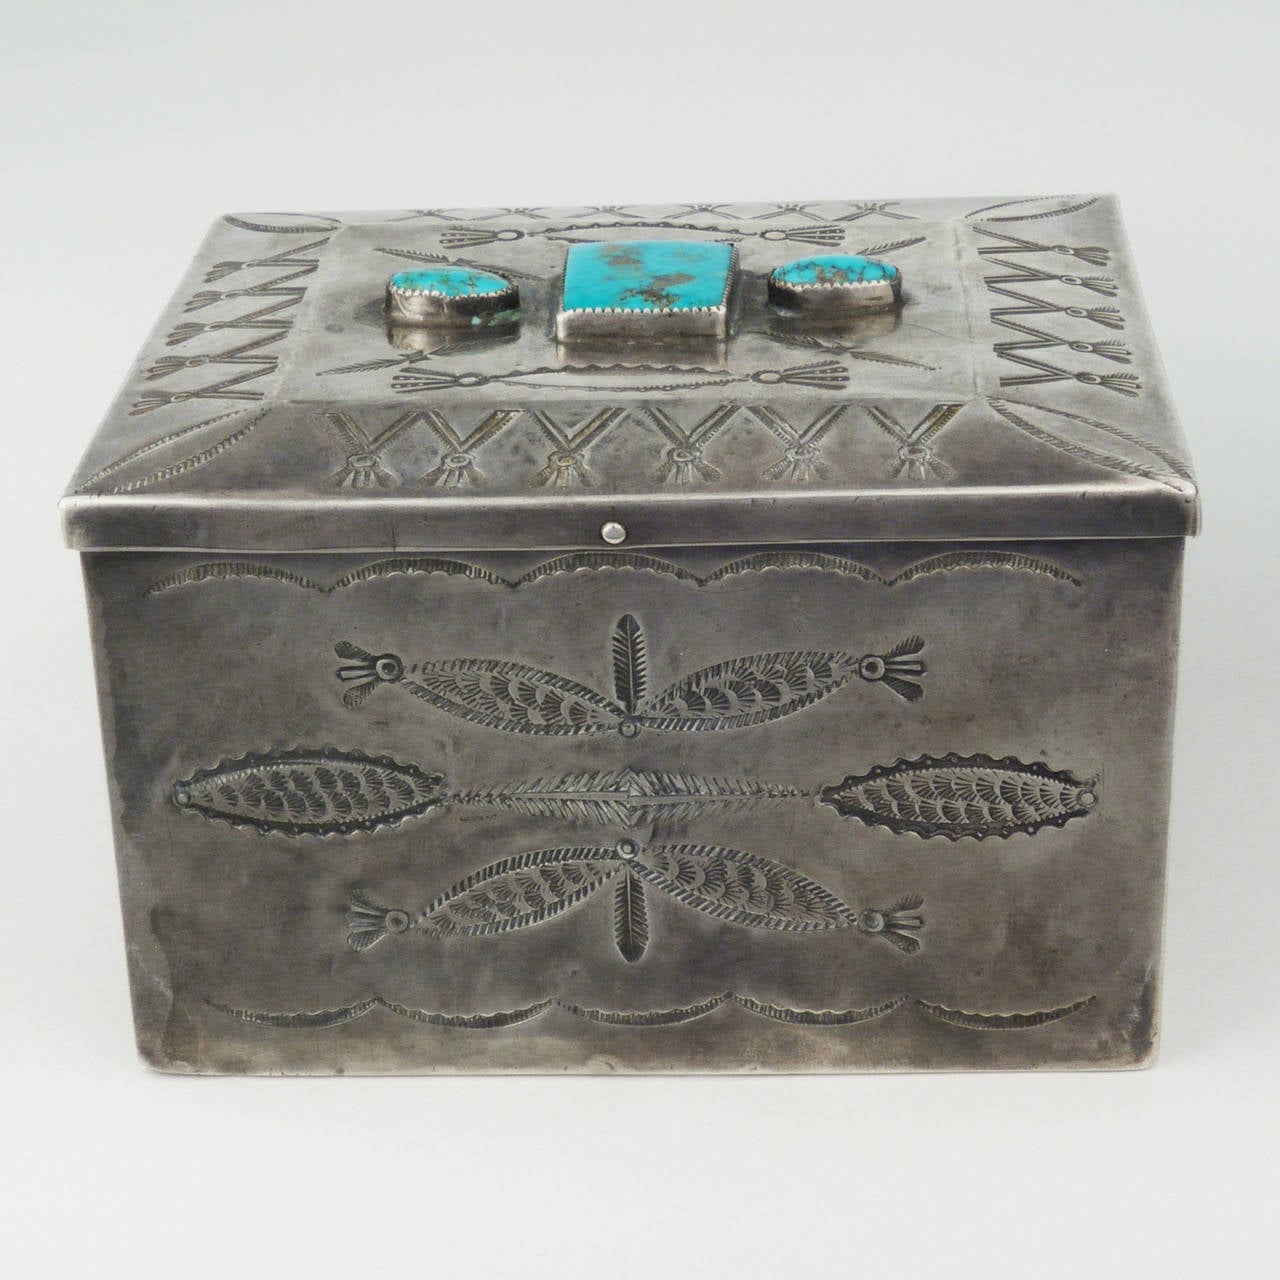 American Vintage Navajo Silver Box with Three Turquoise Cabochons, circa 1940